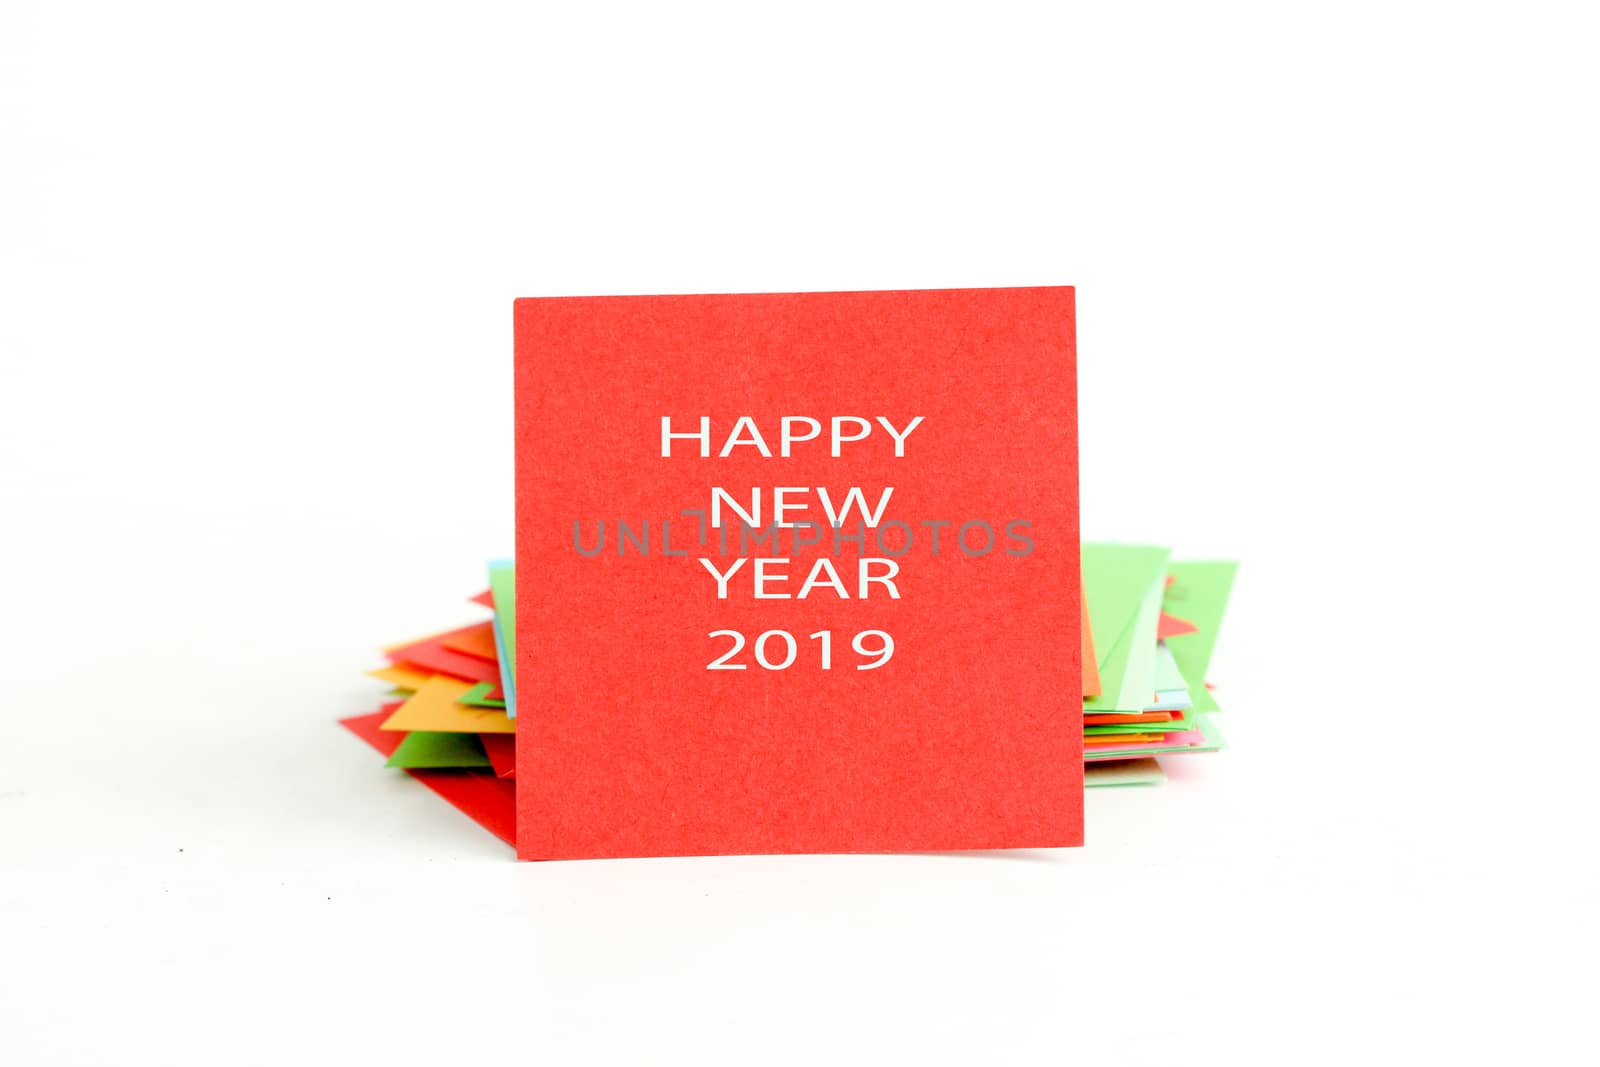 picture of a red note paper with text happy new year 2019